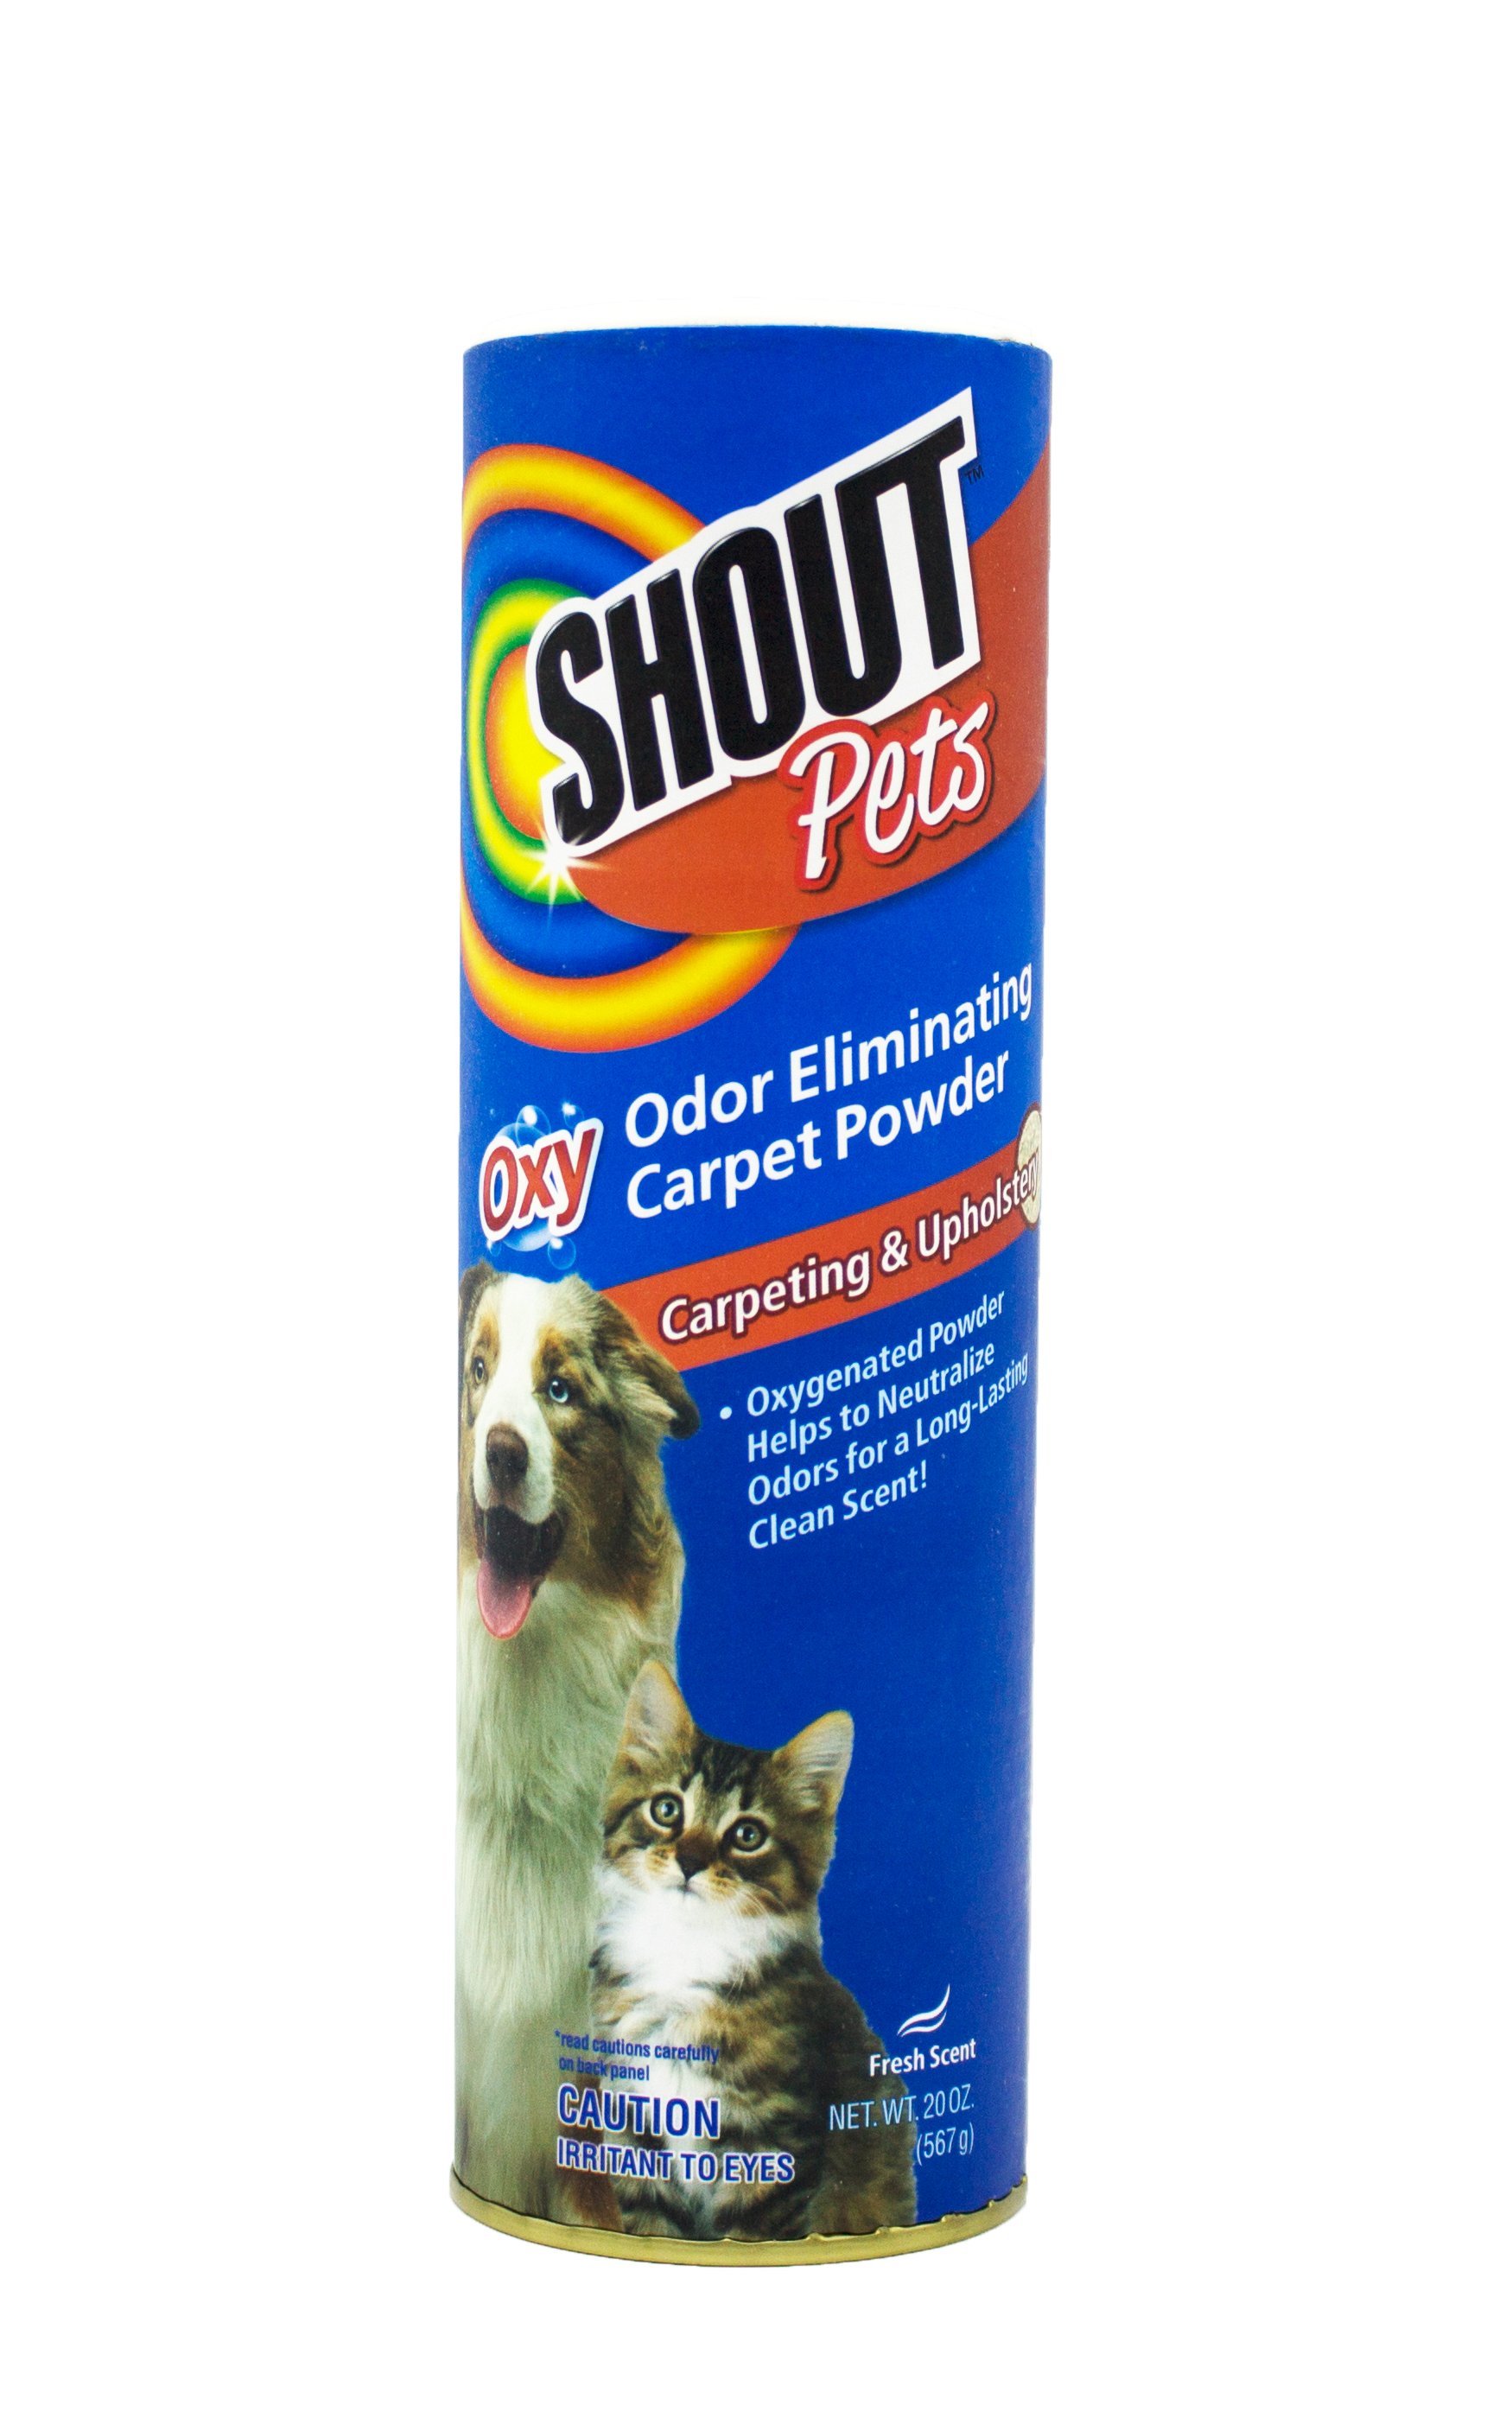 Shout Carpet Aerosol Foam with Oxy for Pet Stains and Odor, 22 fl. oz.